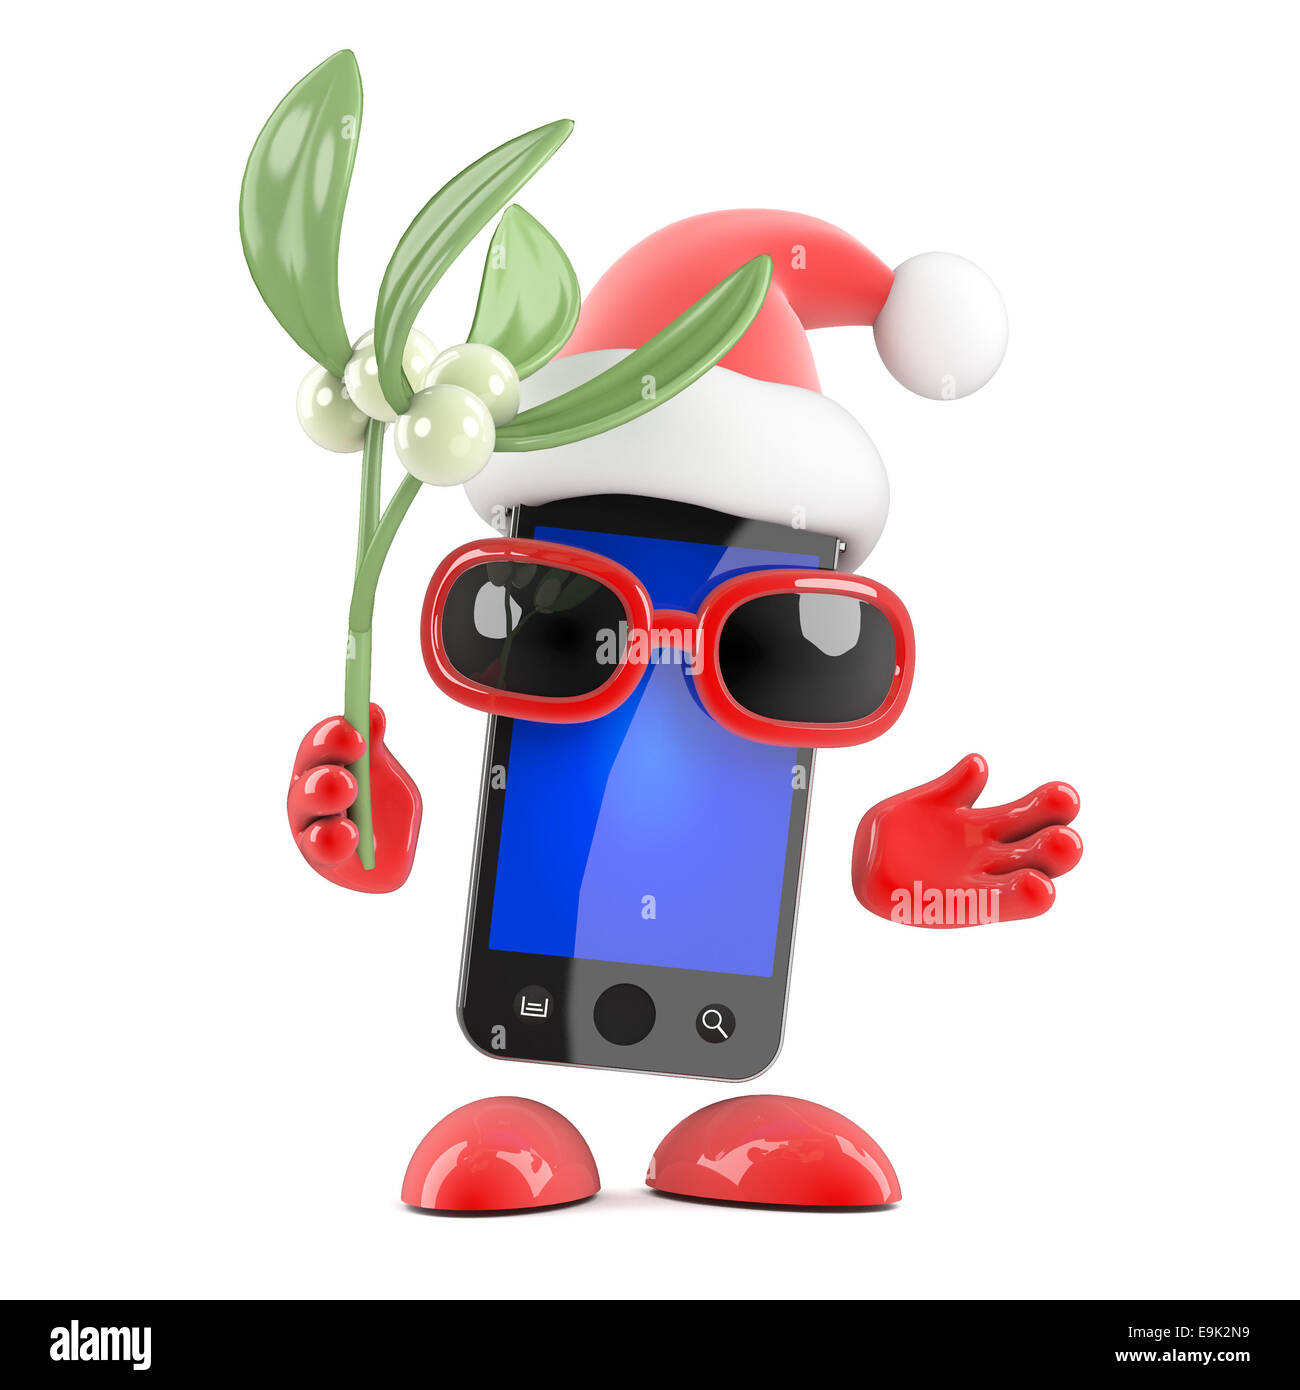 3d render of a smartphone wearing a Santa Claus hat and holding mistletoe Stock Photo